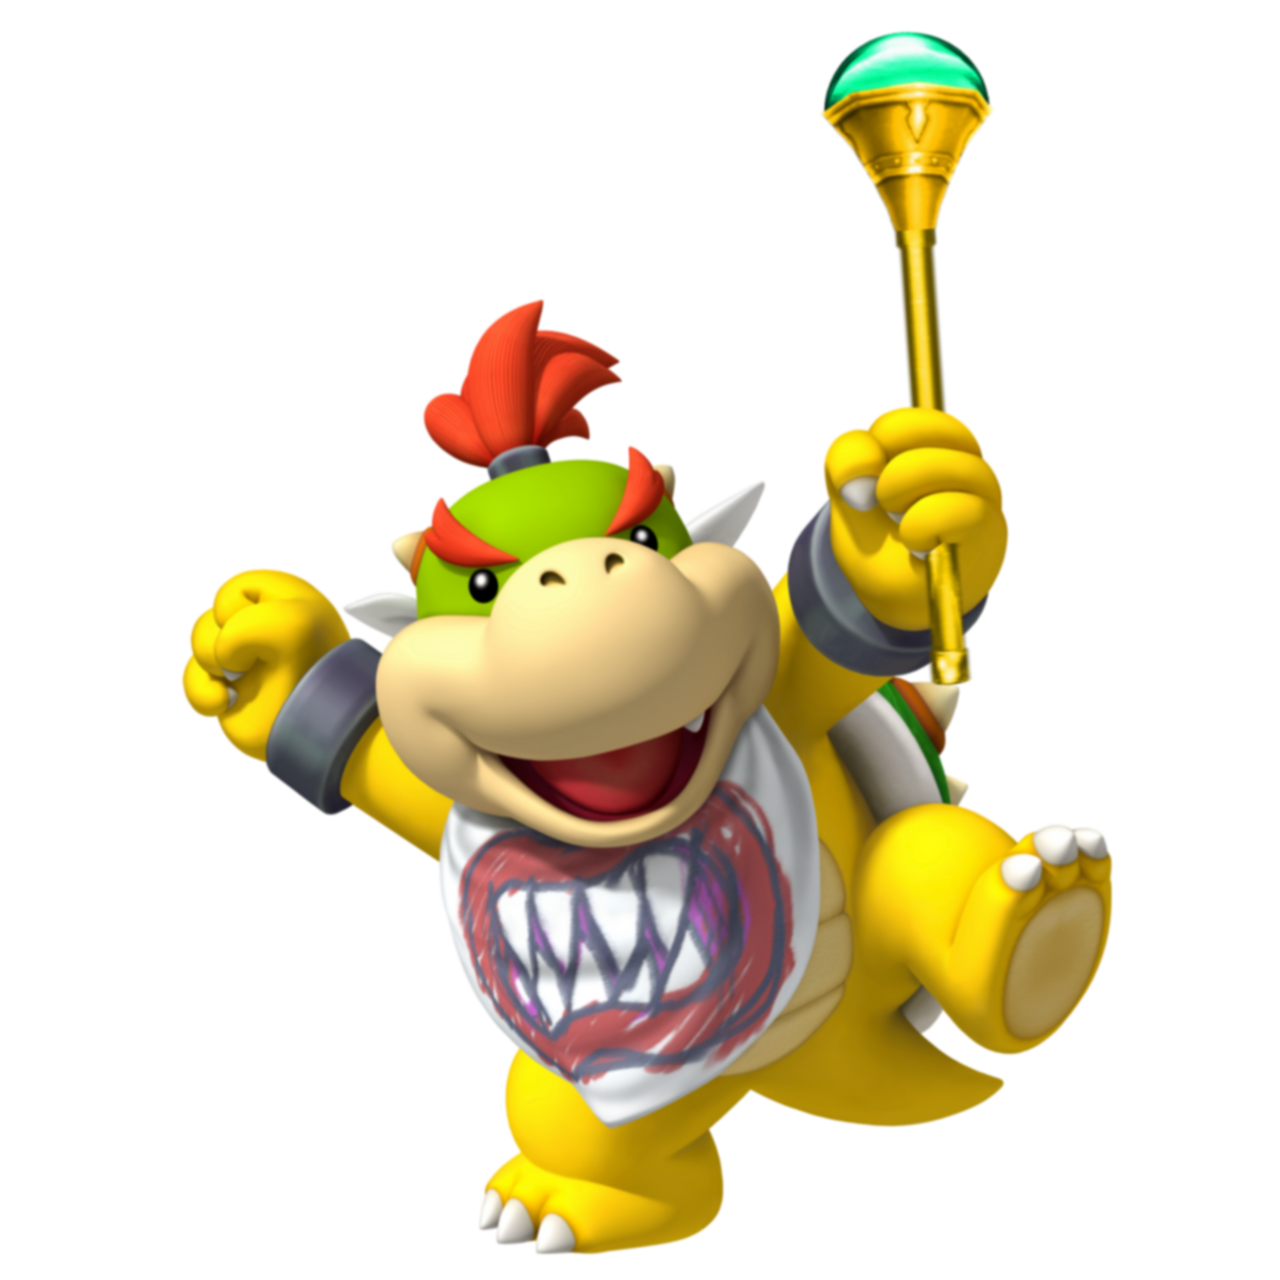 Bowser Jr The First Koopaling With A Scepter By Tjziomek On Deviantart